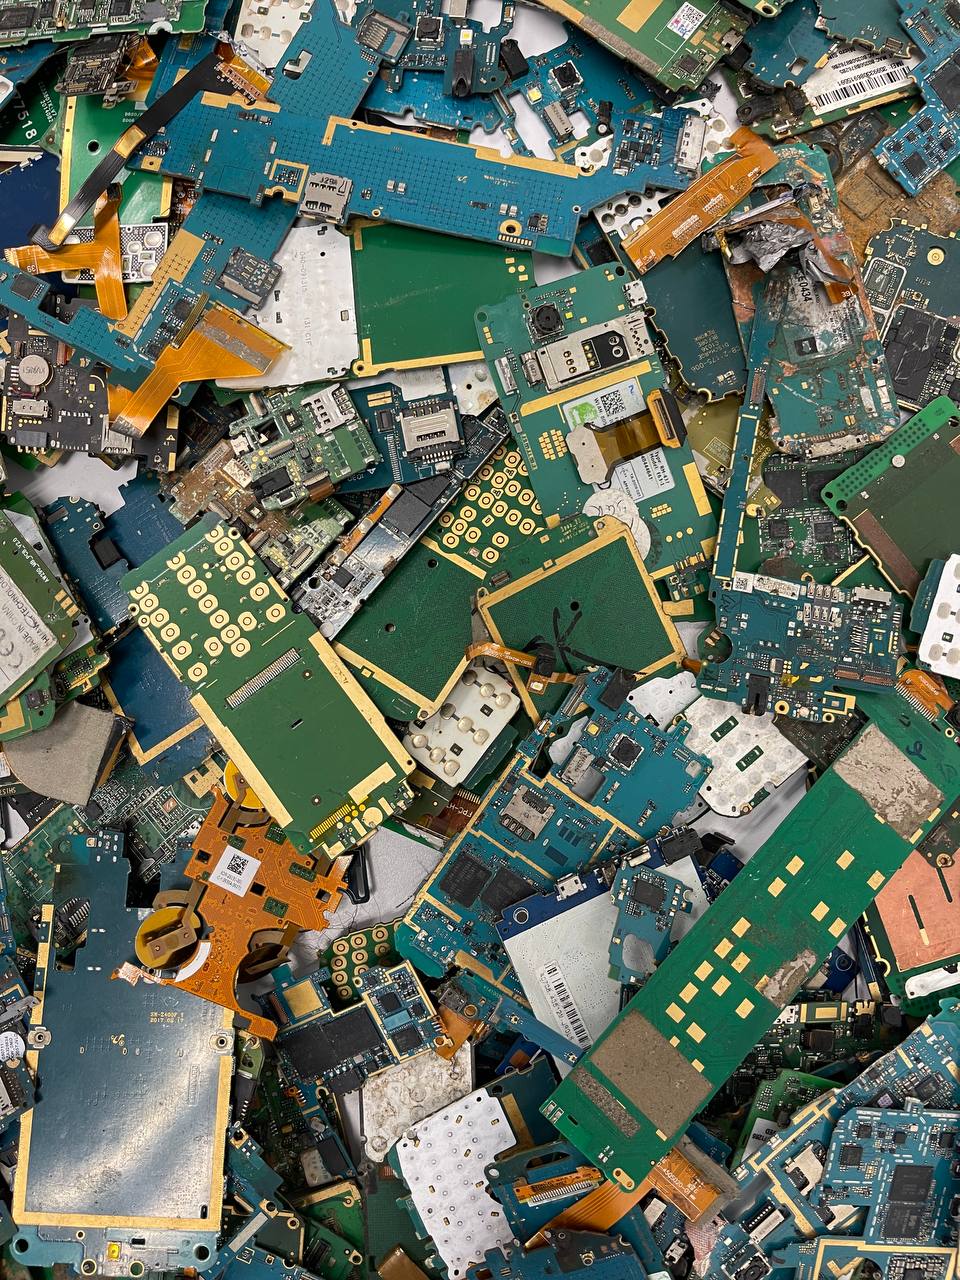 Collection and Disposal of Electronic Waste